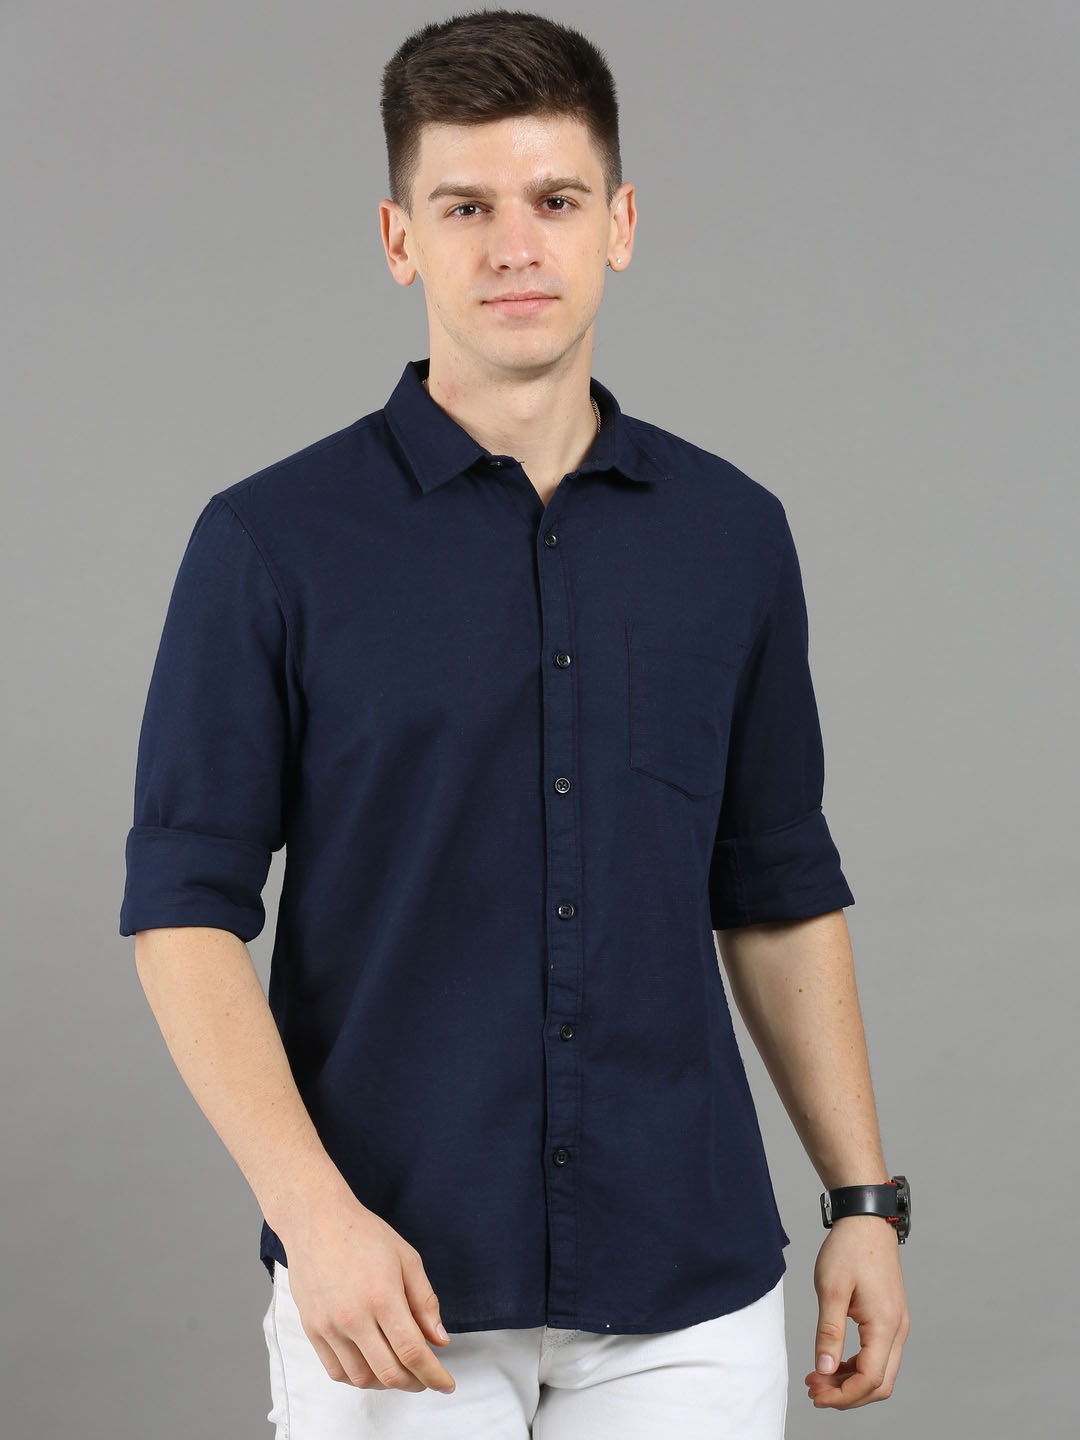 

Bought First Spread Collar Classic Casual Shirt, Navy blue